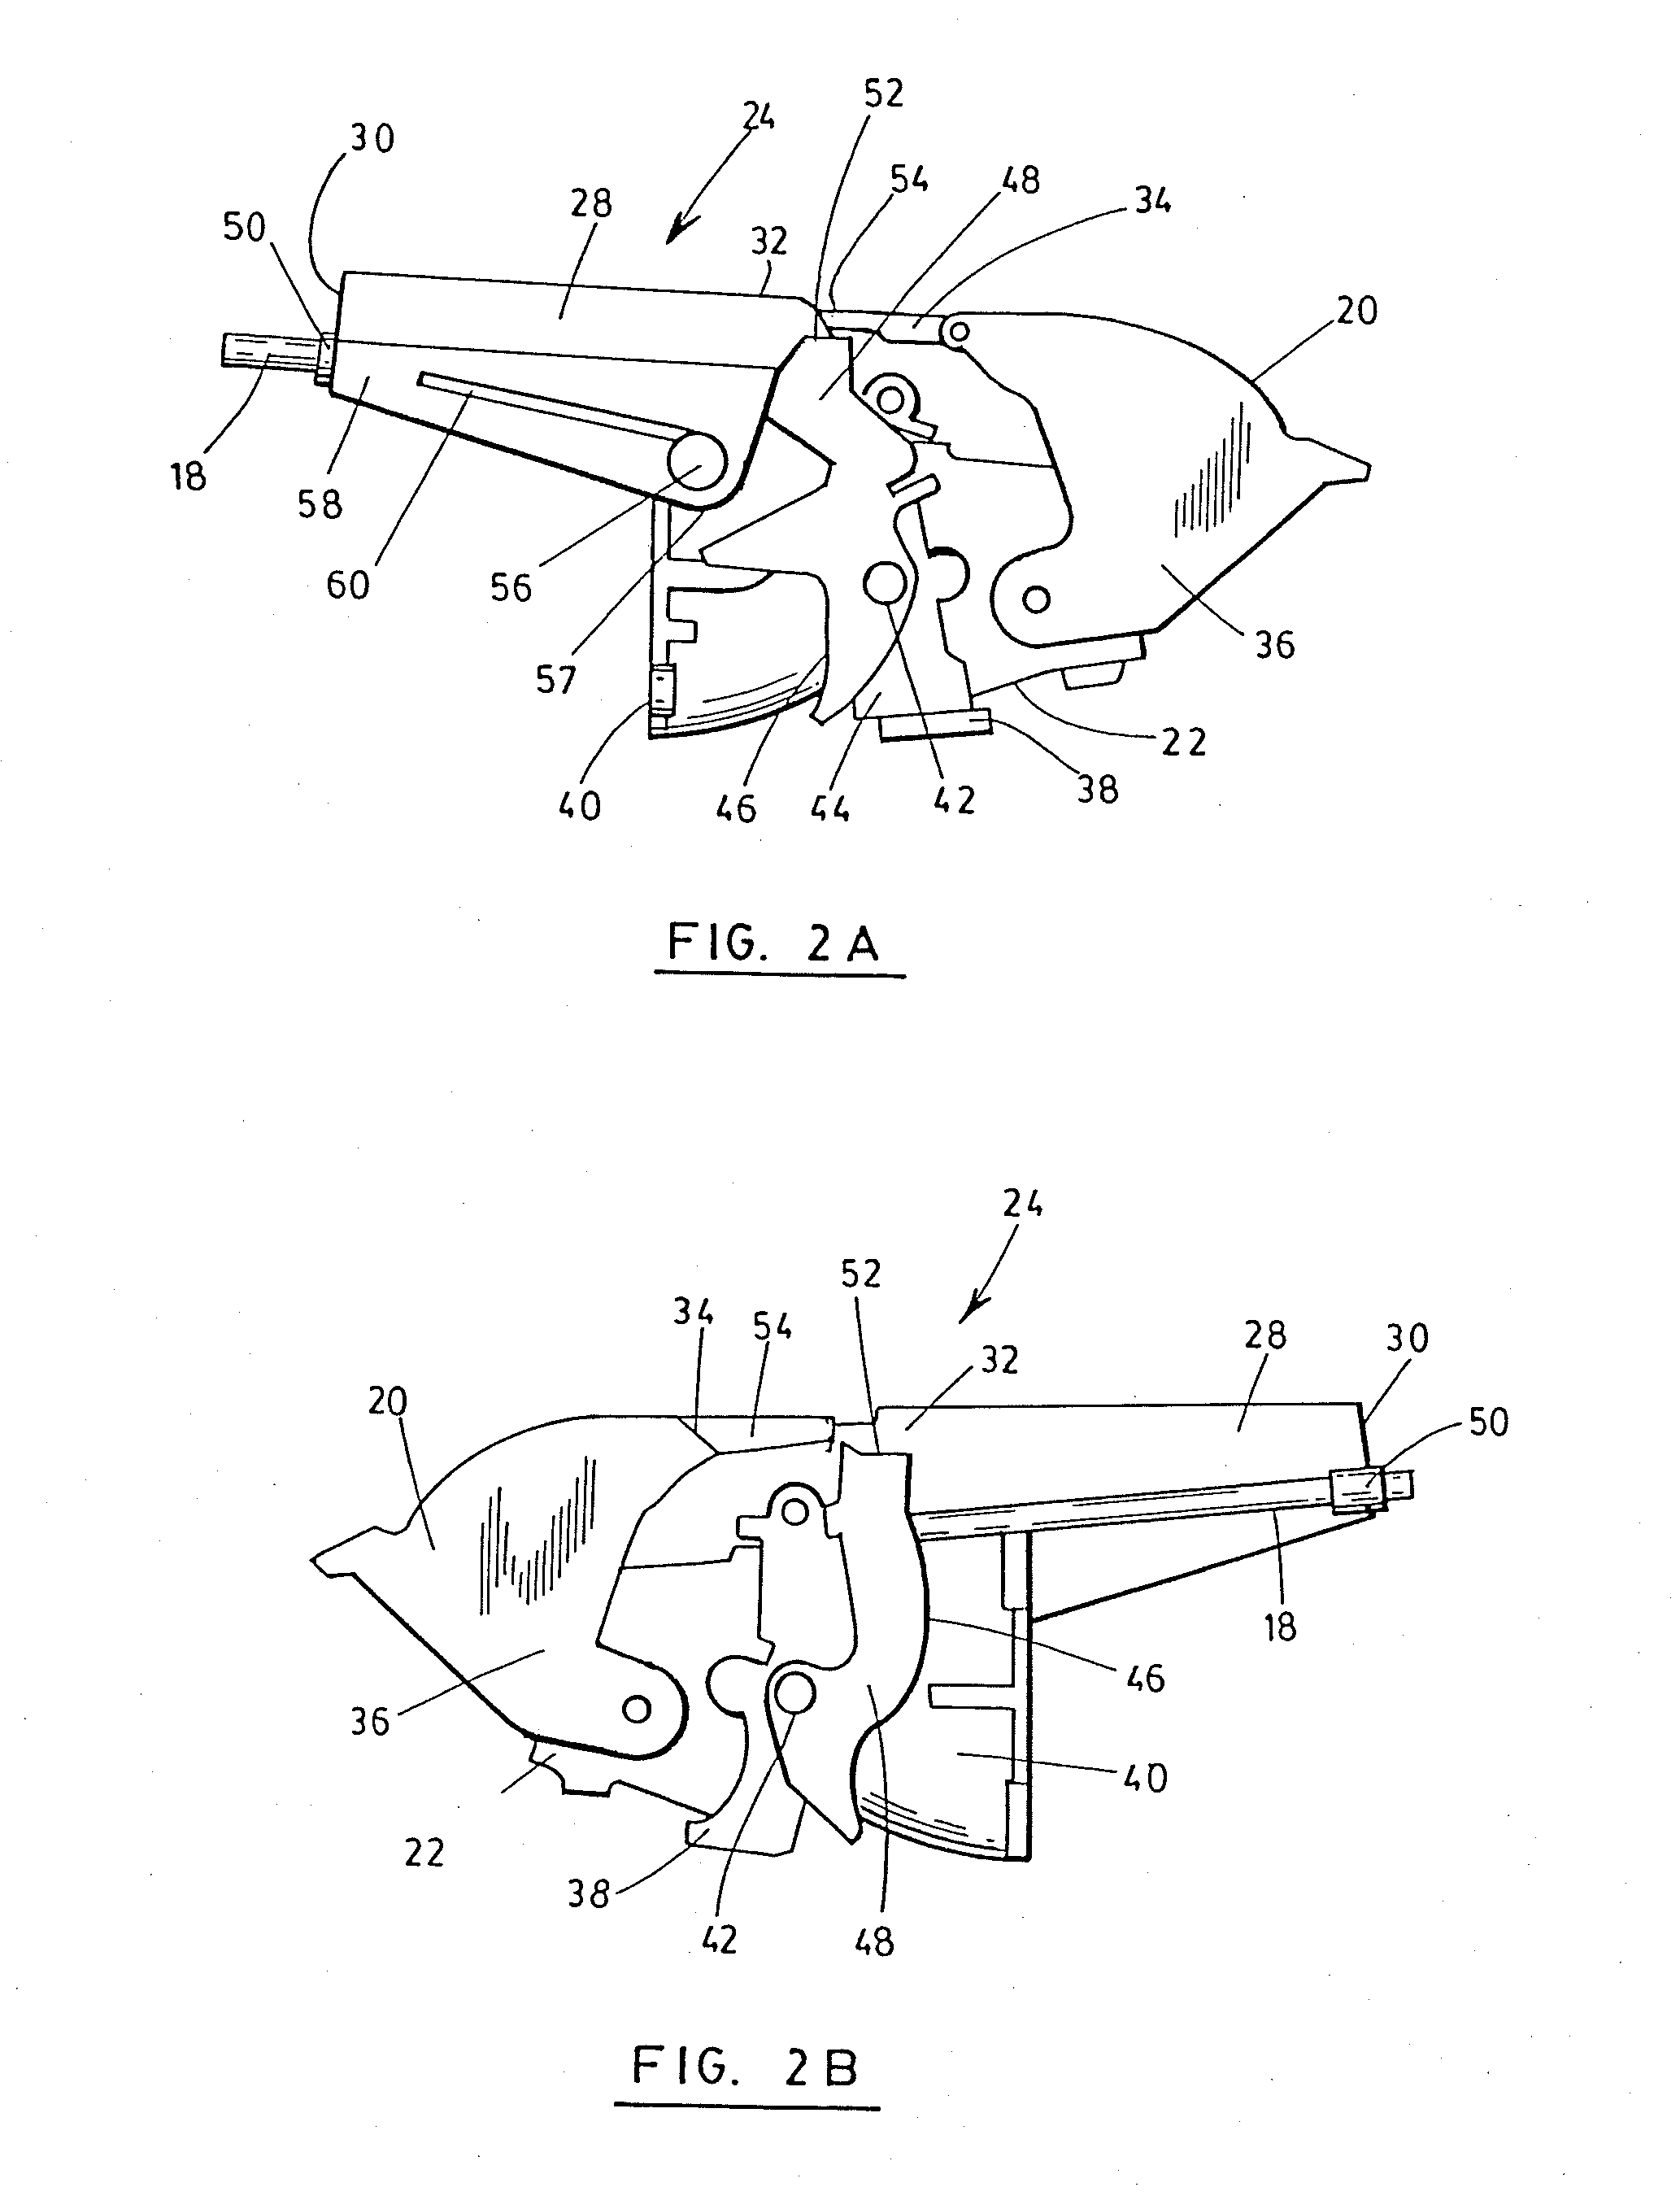 Commonly actuated trim and reverse system for a jet propulsion watercraft